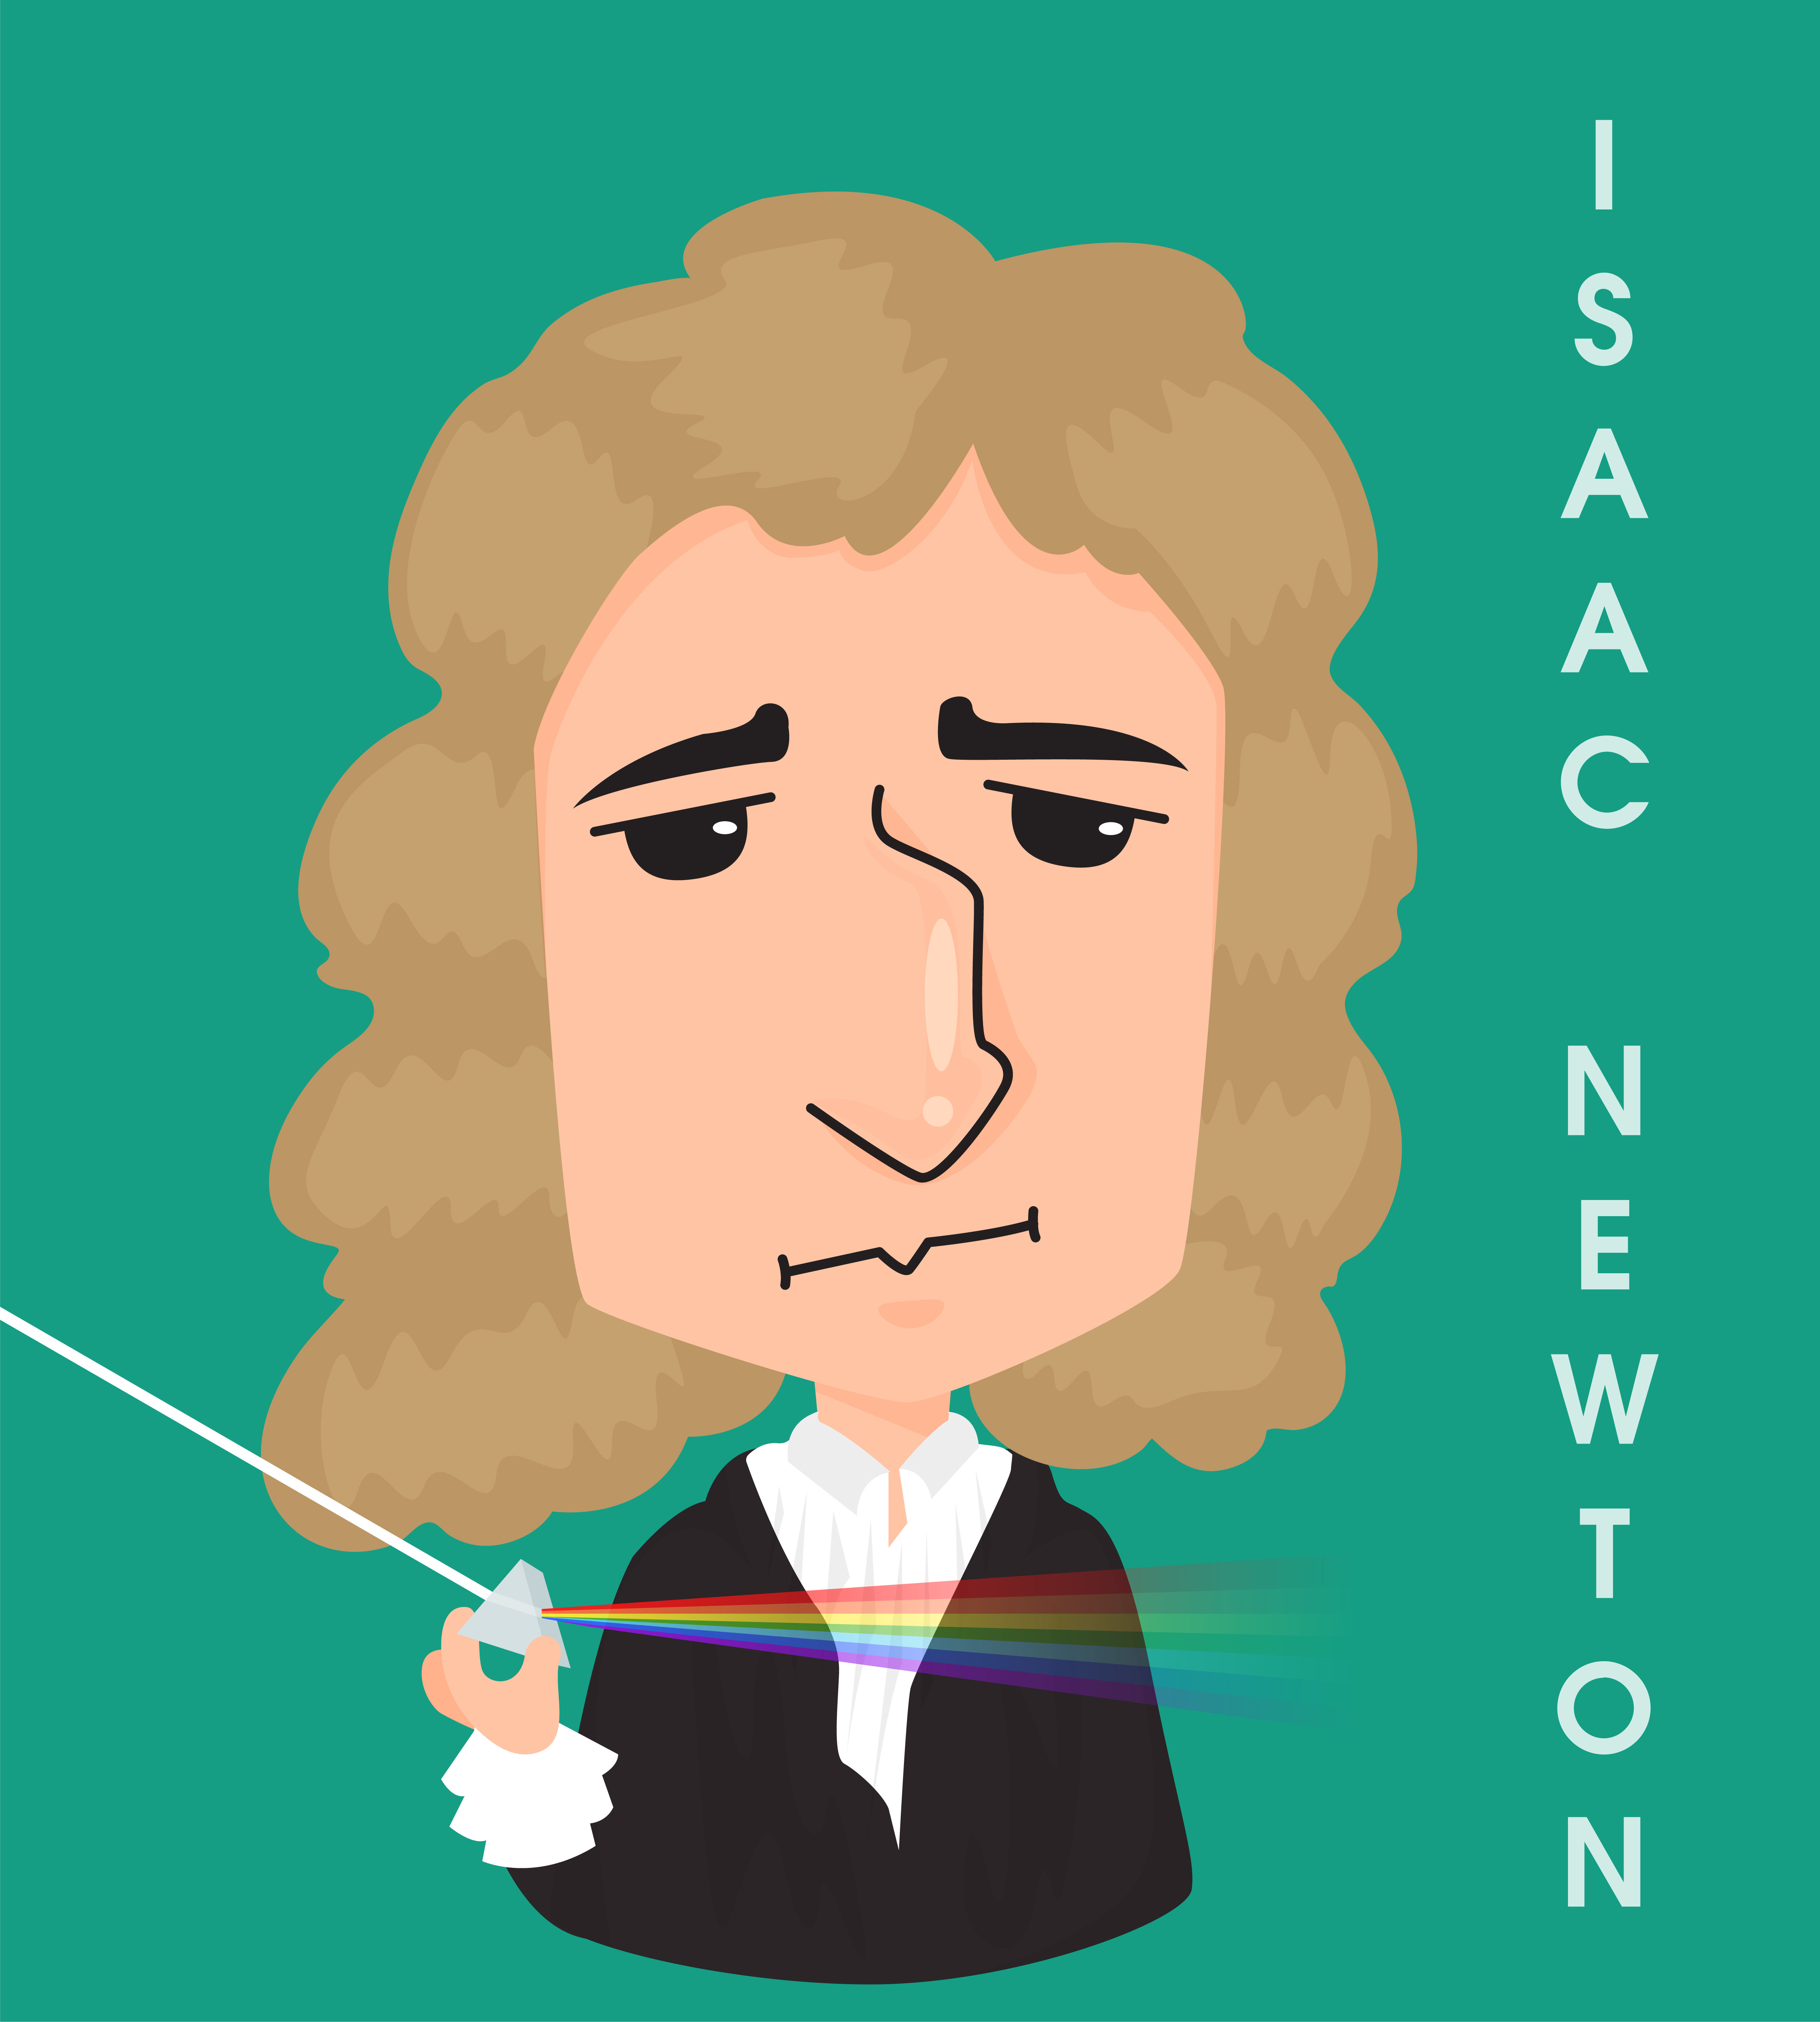 Isaac newton discovered gravity - molivenue